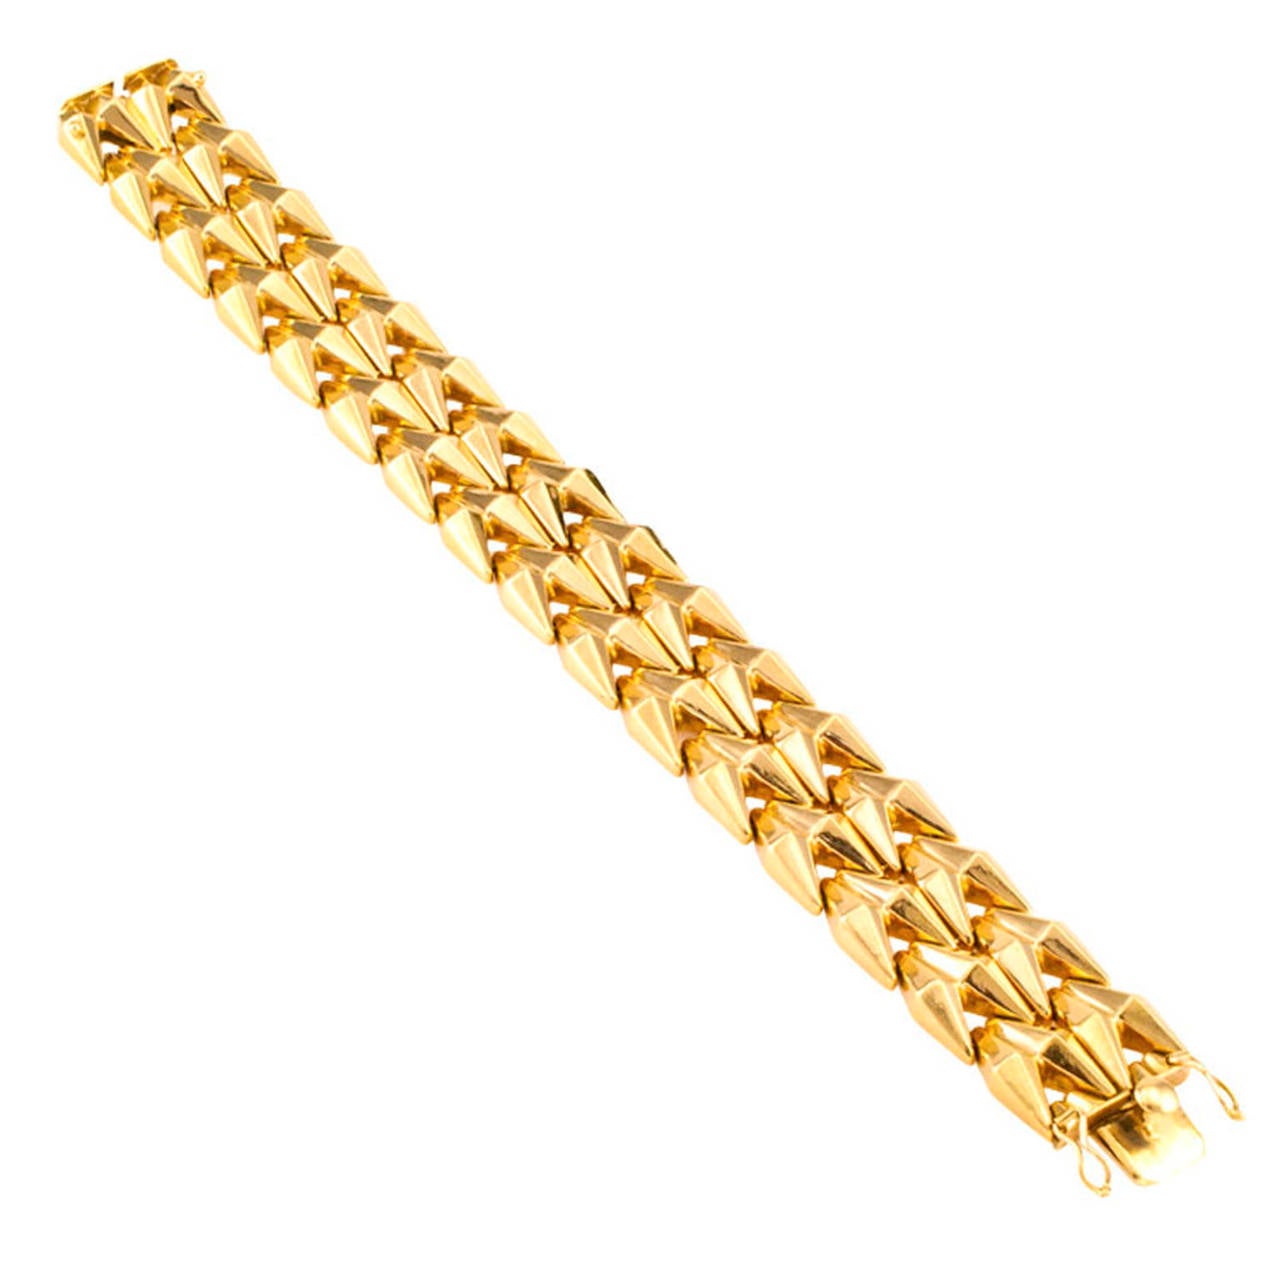 Spritzer And Furman 1950s Retro Gold Bracelet

A strap of sculptured 18 karat gold comprising flexible links designed as triple strands of conjoined twin conical shapes with flat angular sides that, given the slightest movement of the wrist, catch